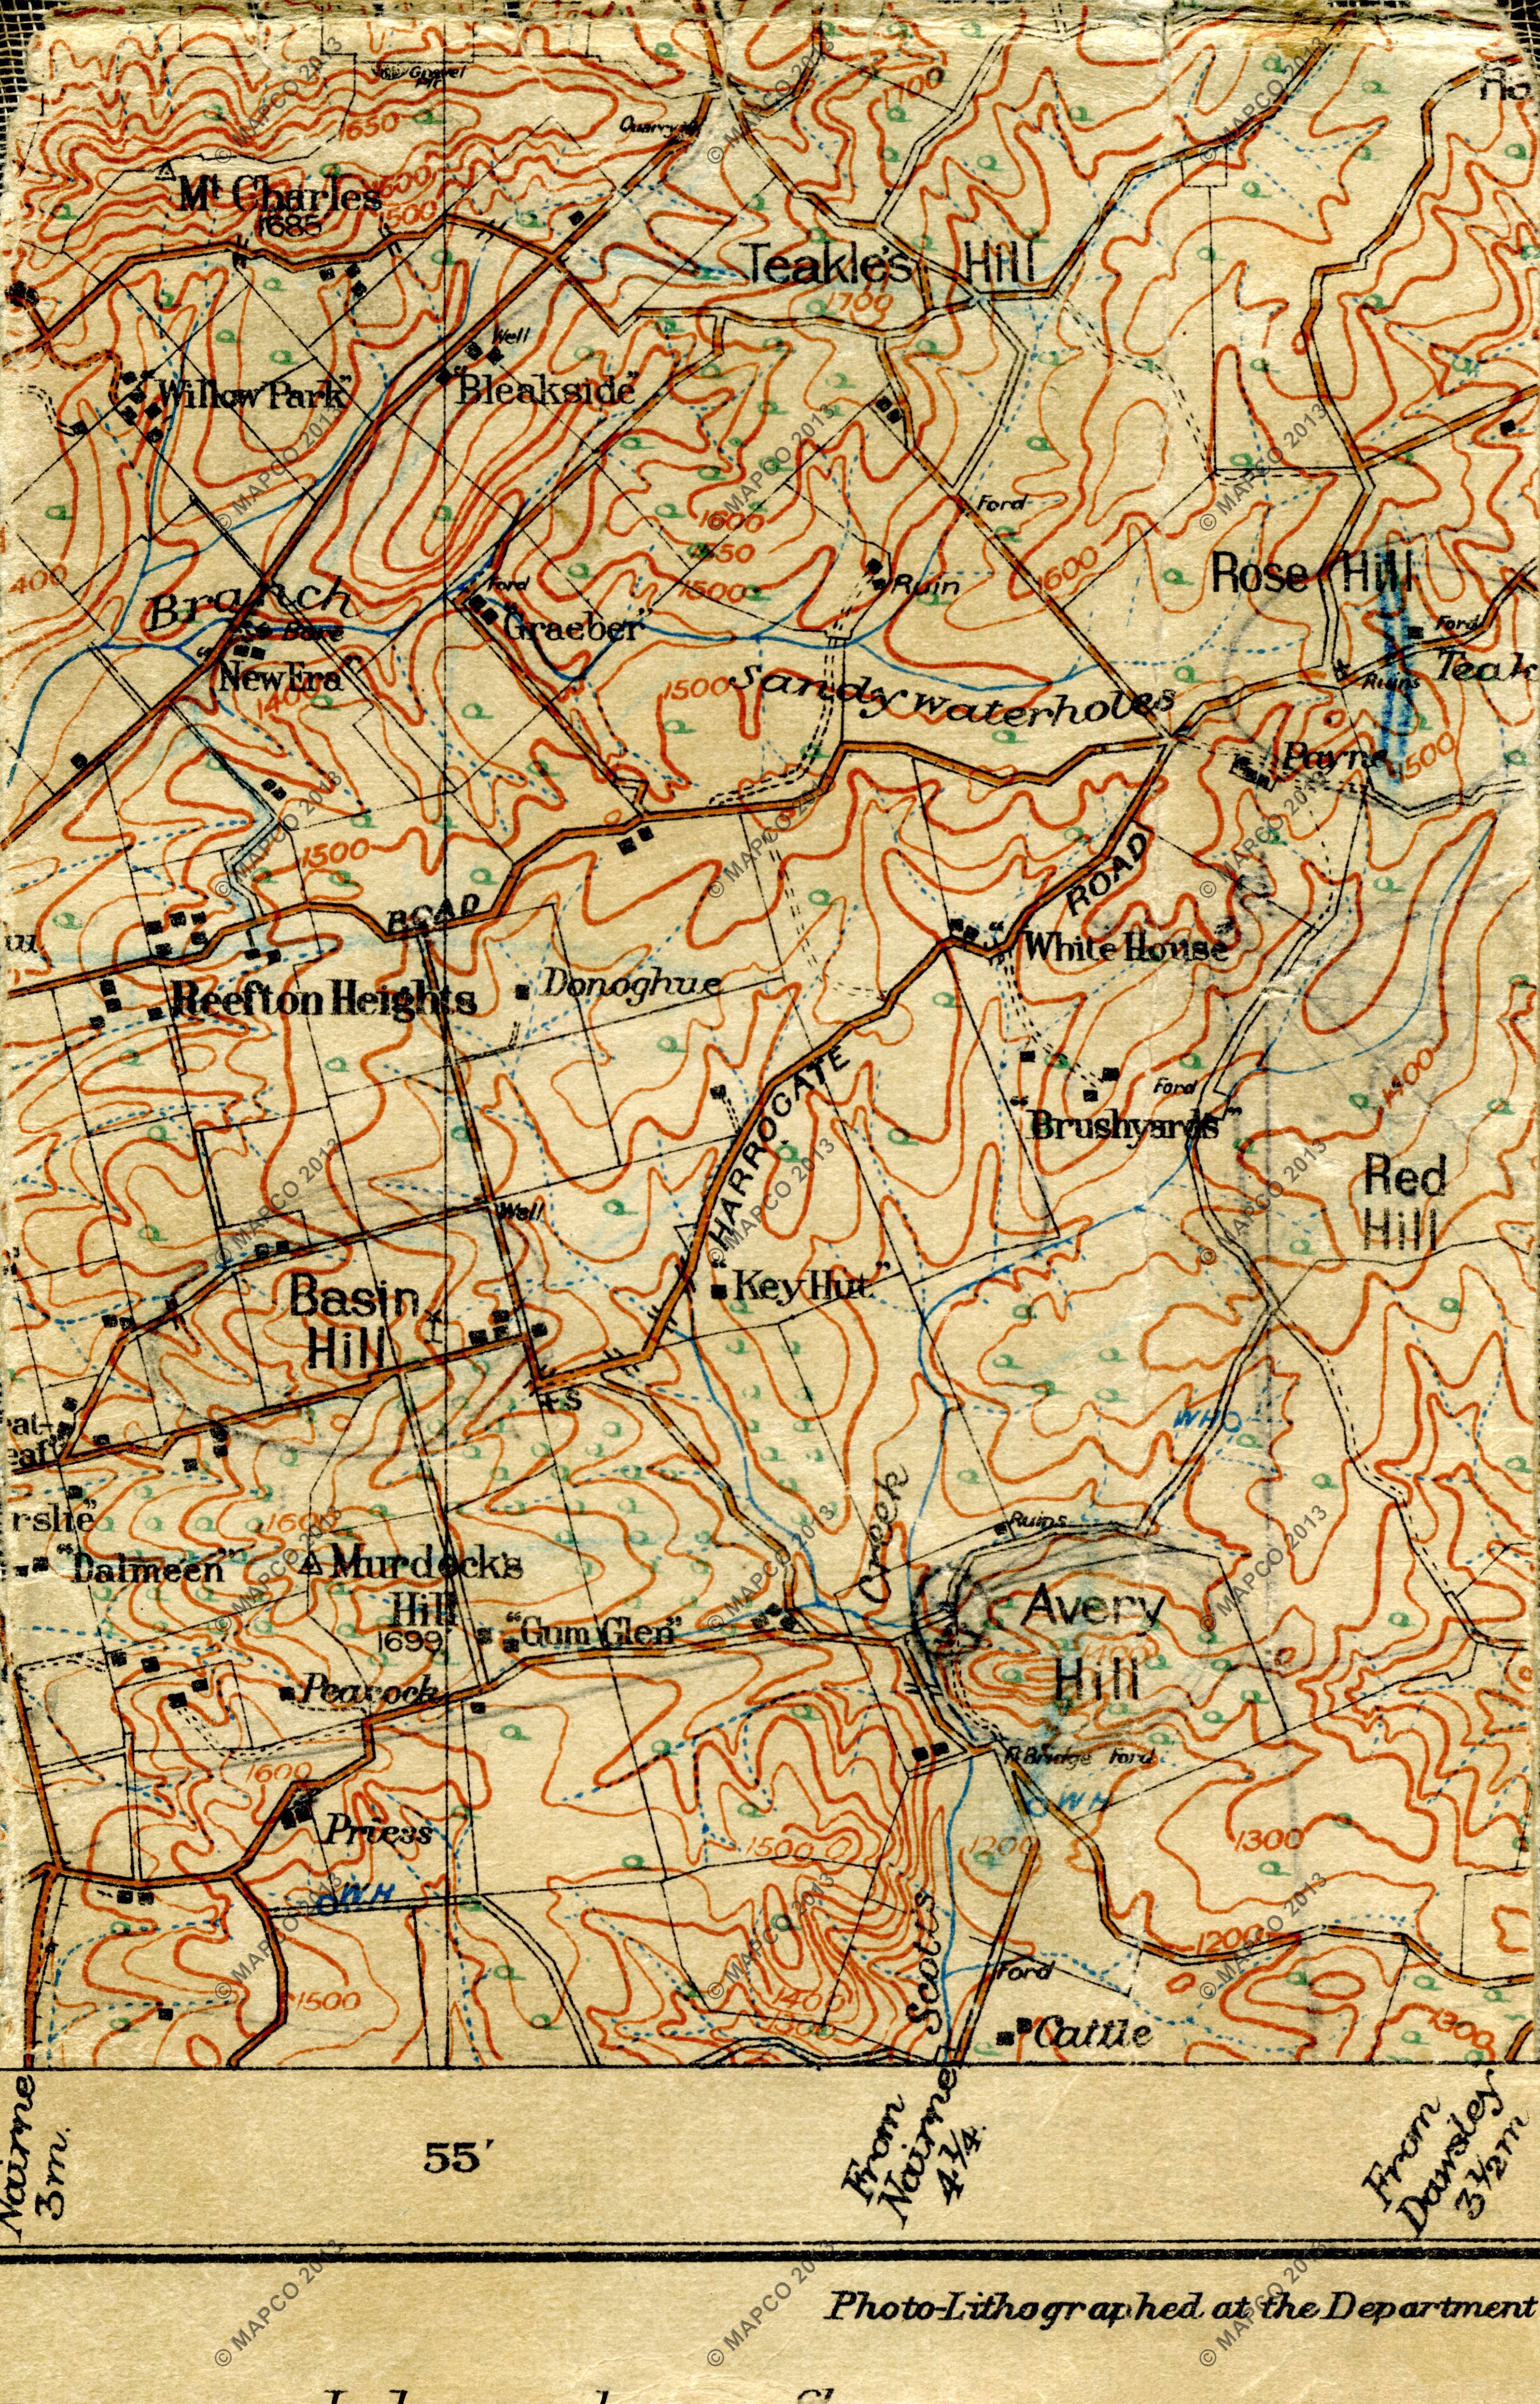 Return To Previous Map Image